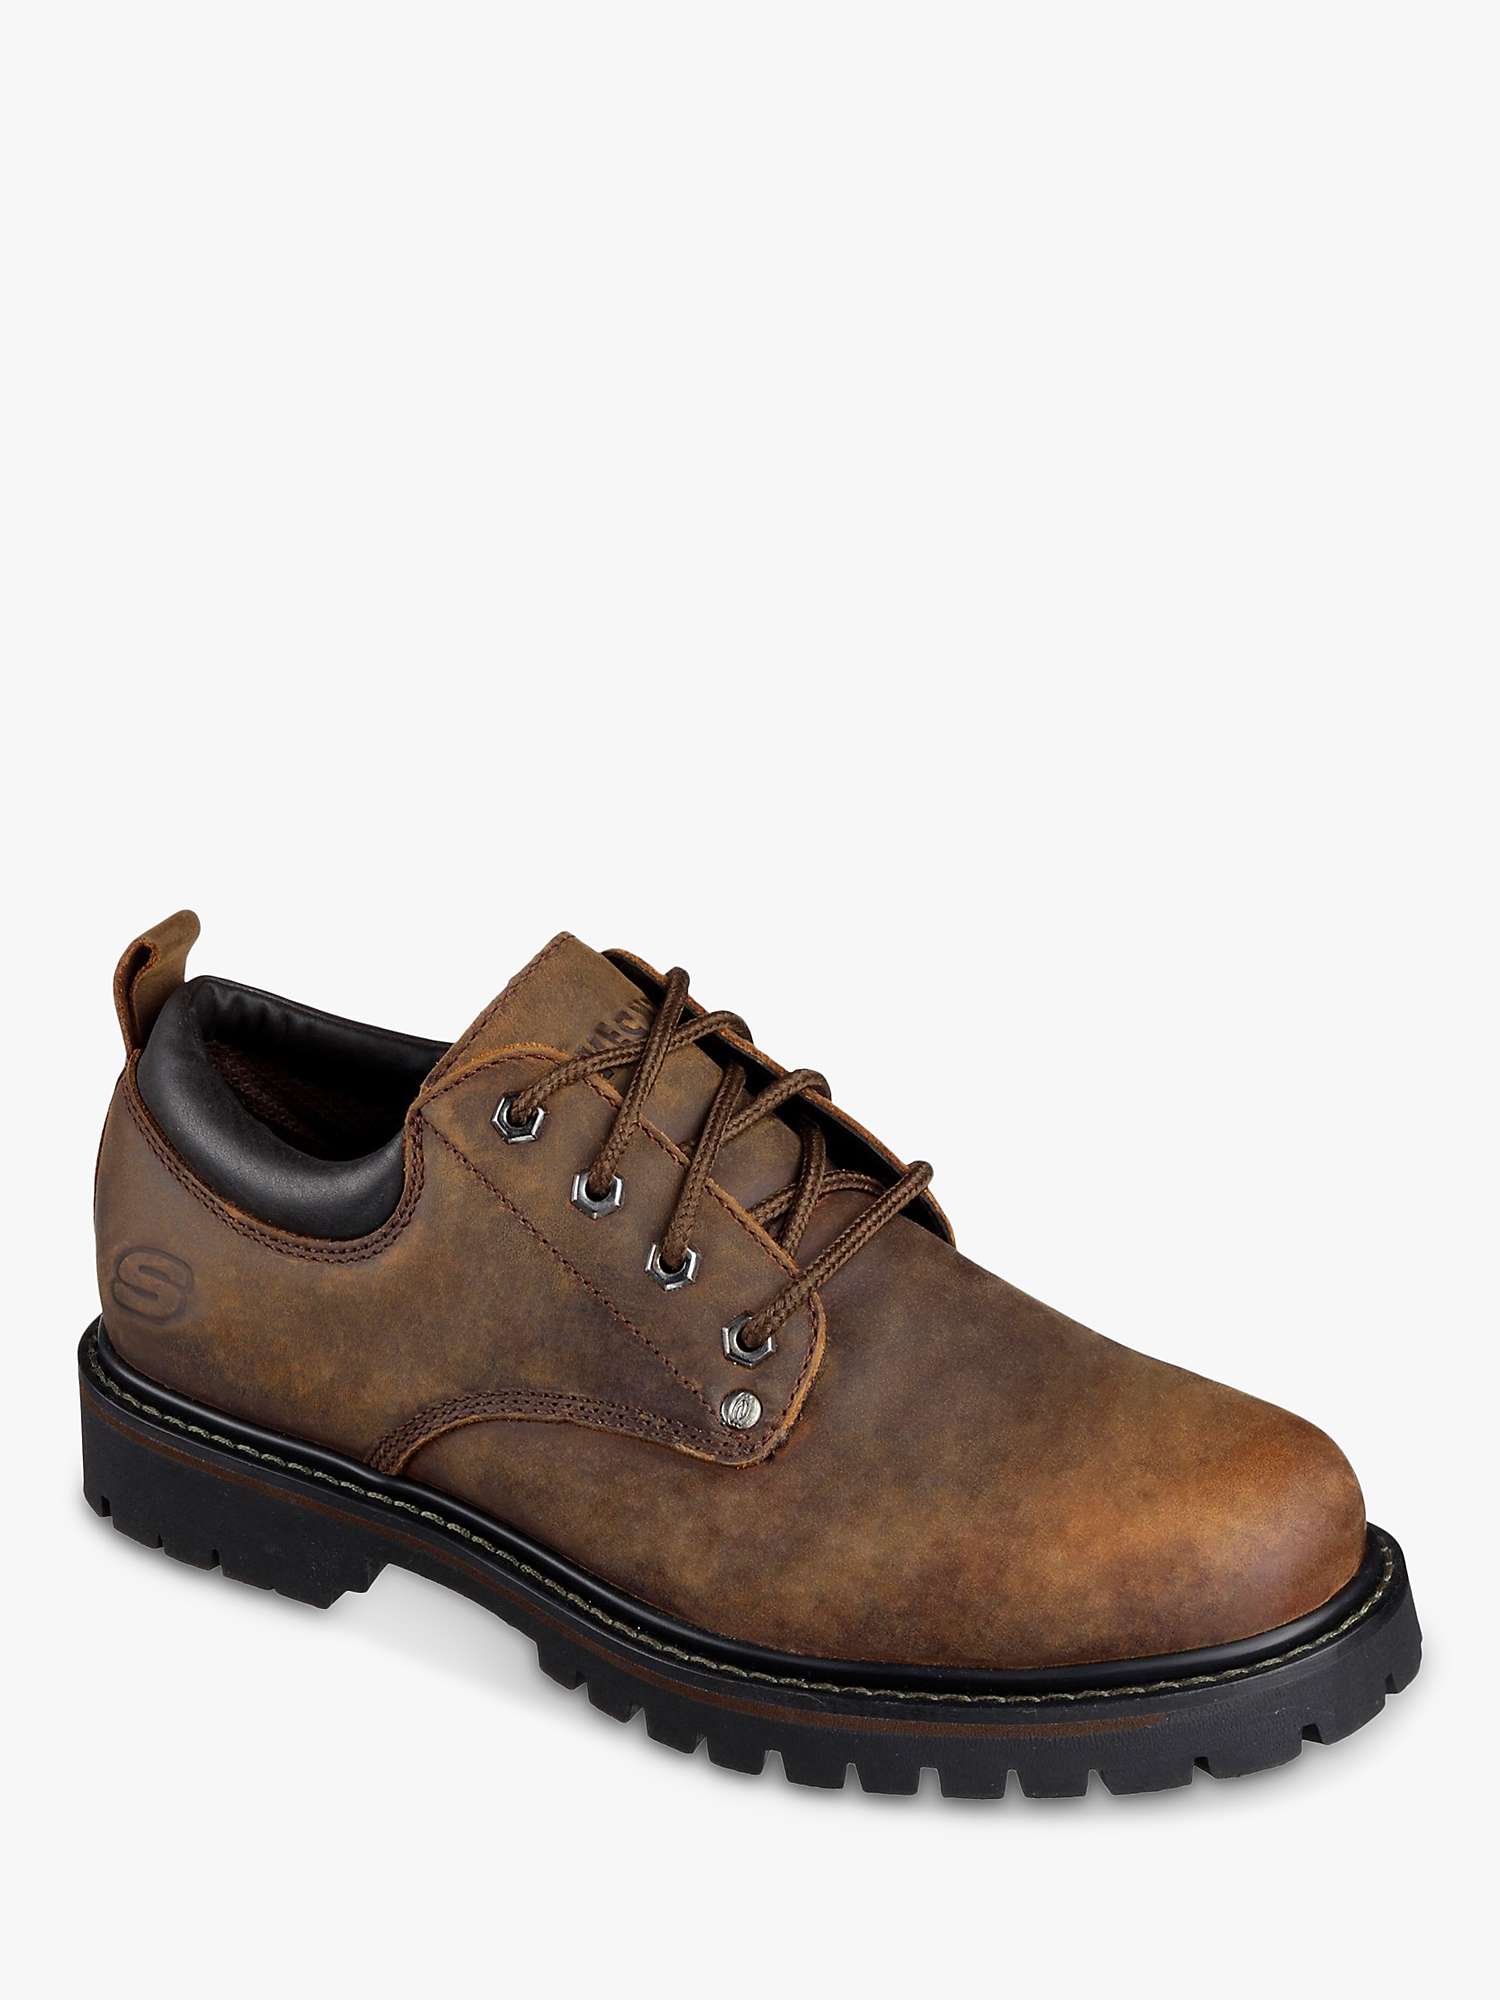 Buy Skechers Leather Tom Cats Lace Up Oxford Shoes, Dark Brown Online at johnlewis.com